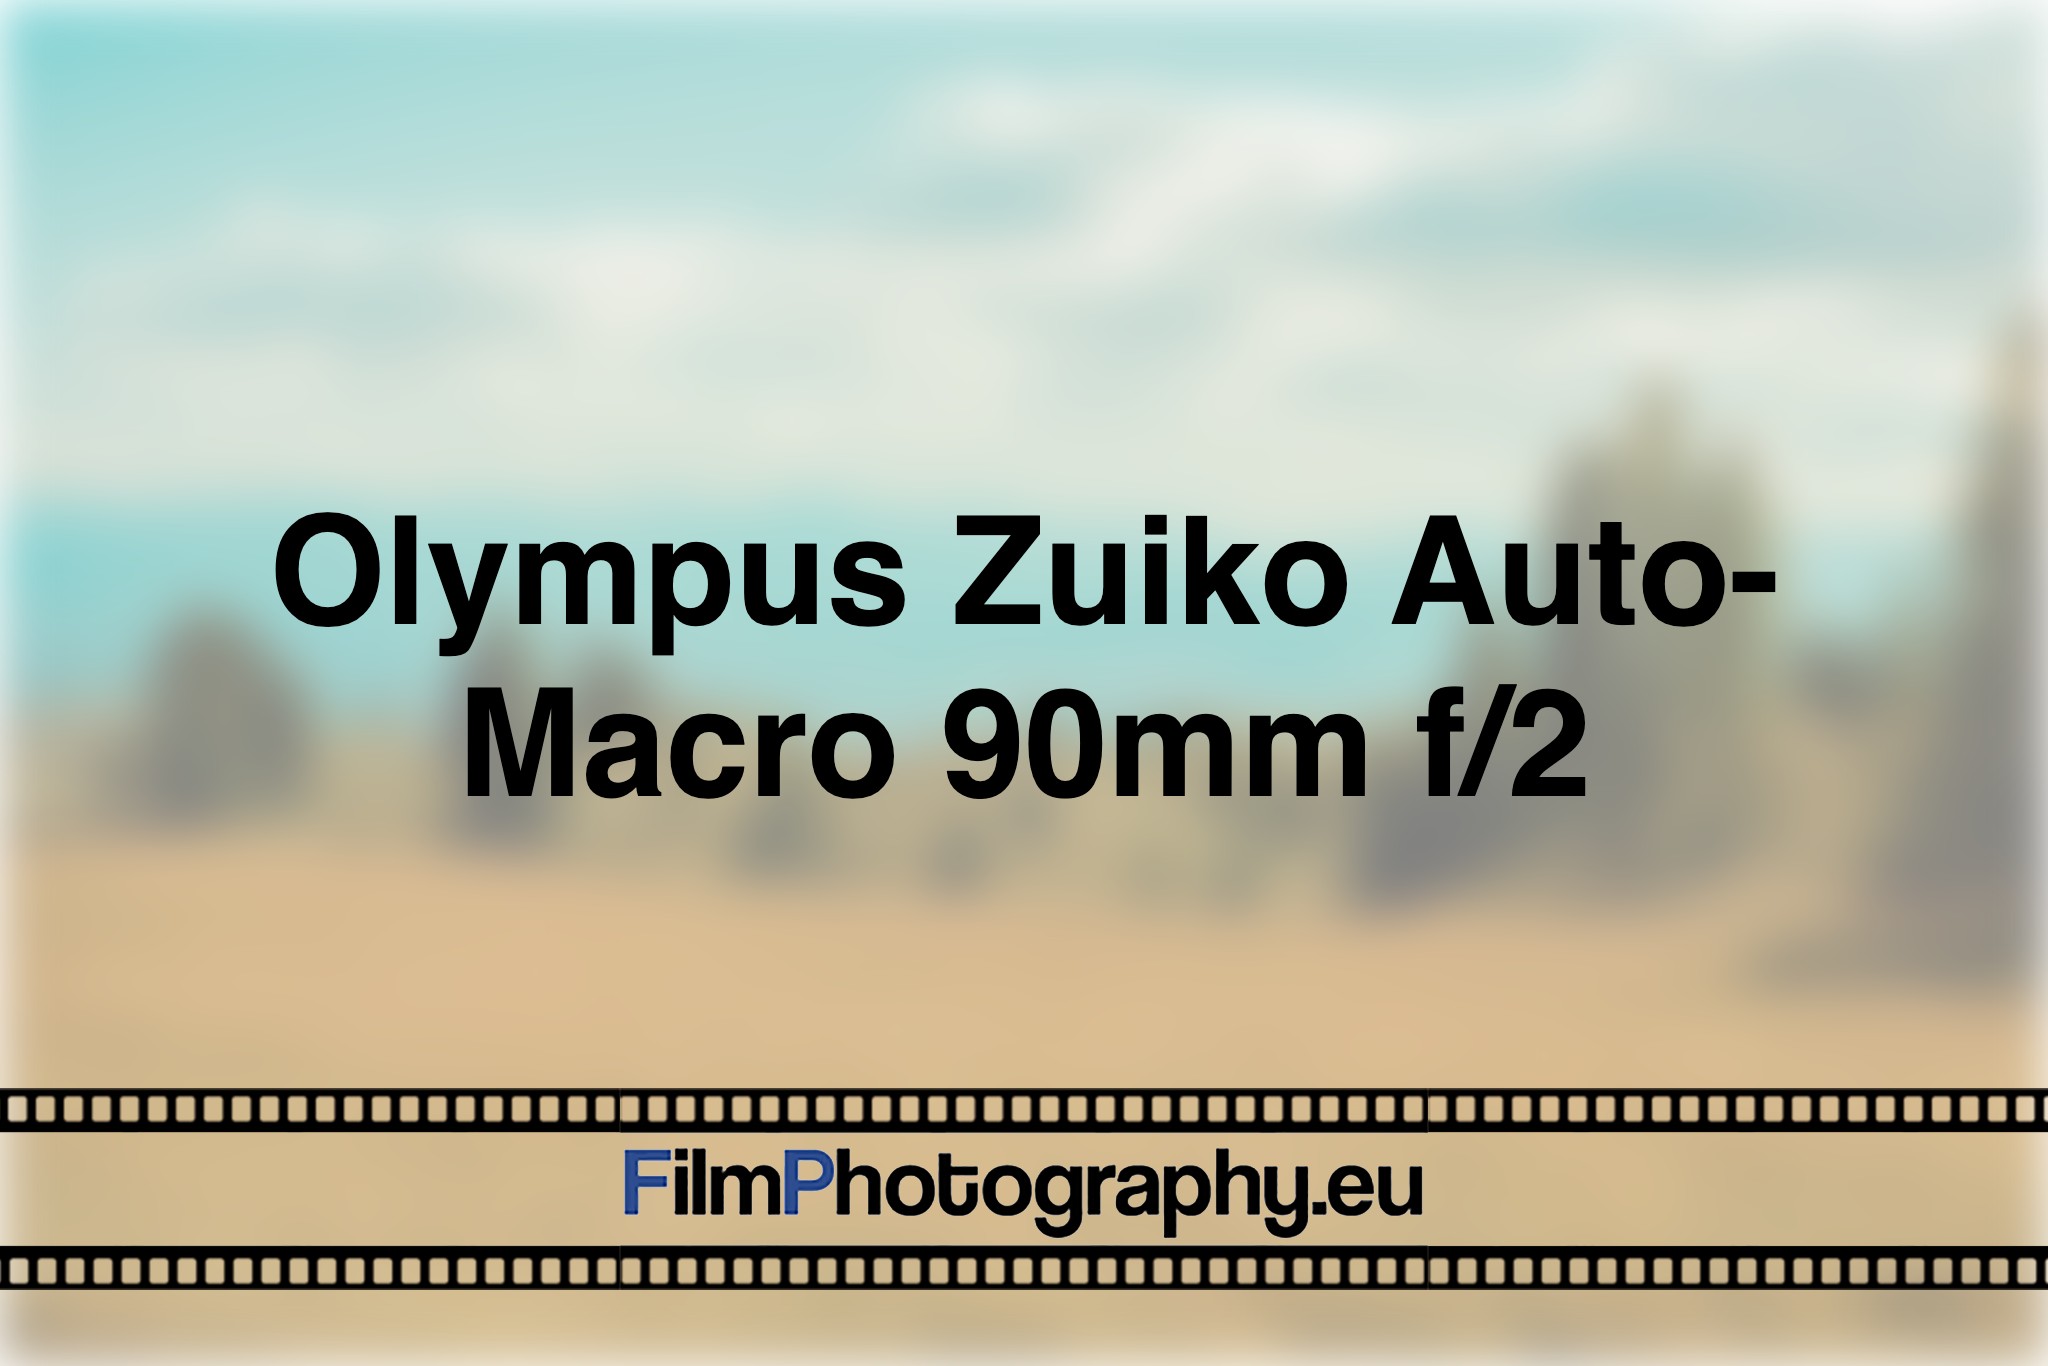 Olympus Zuiko Auto-Macro 90mm f/2 - What cameras can it be used for?